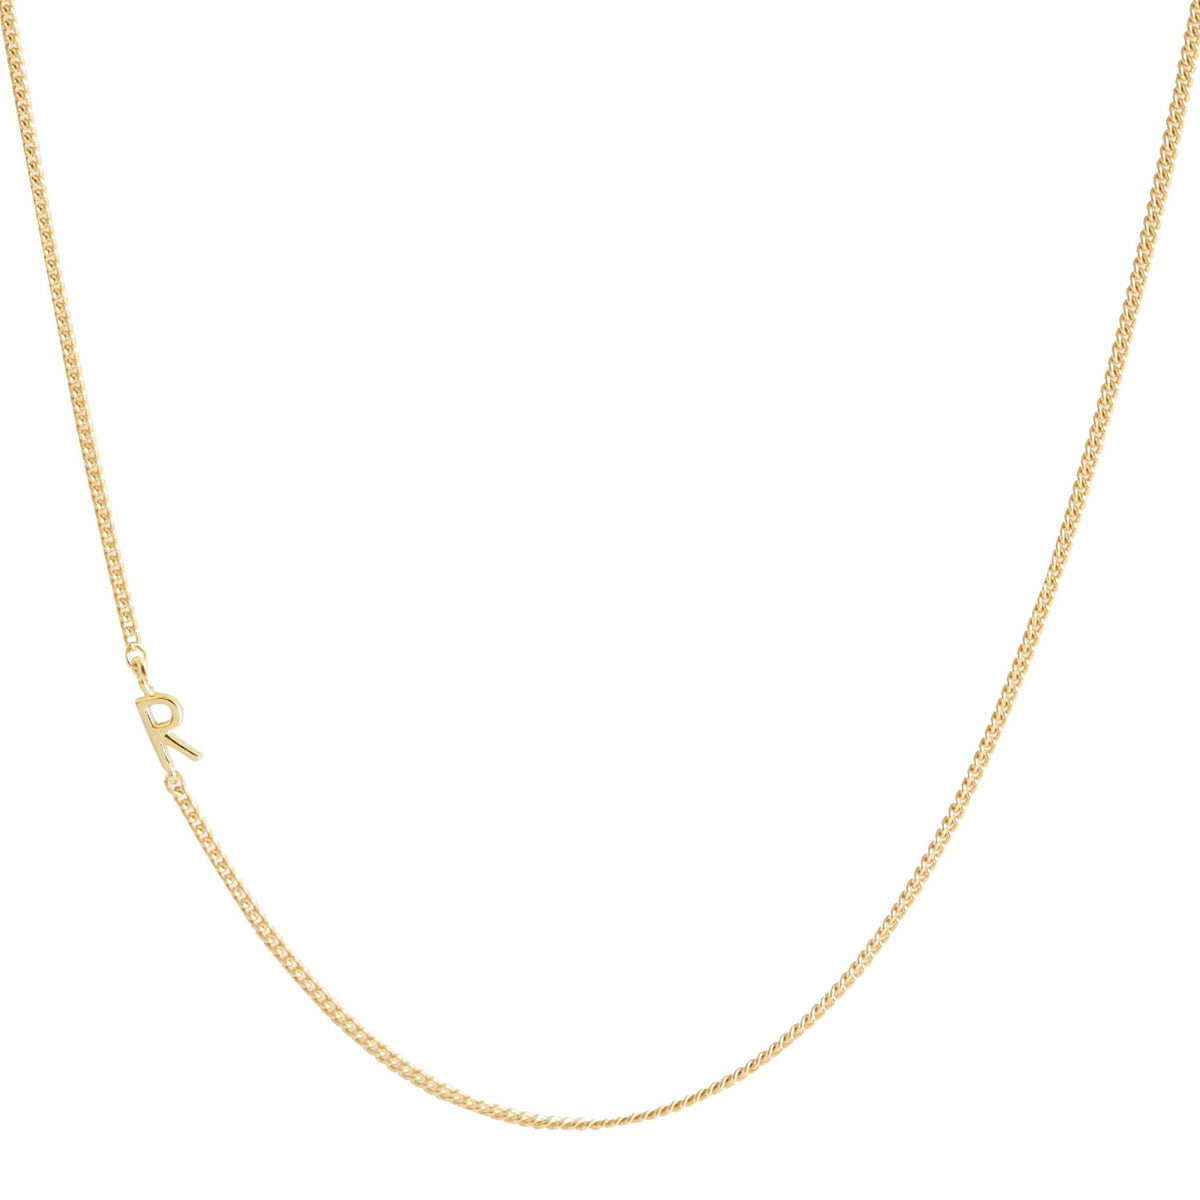 NOTABLE OFFSET INITIAL NECKLACE - R - GOLD - SO PRETTY CARA COTTER